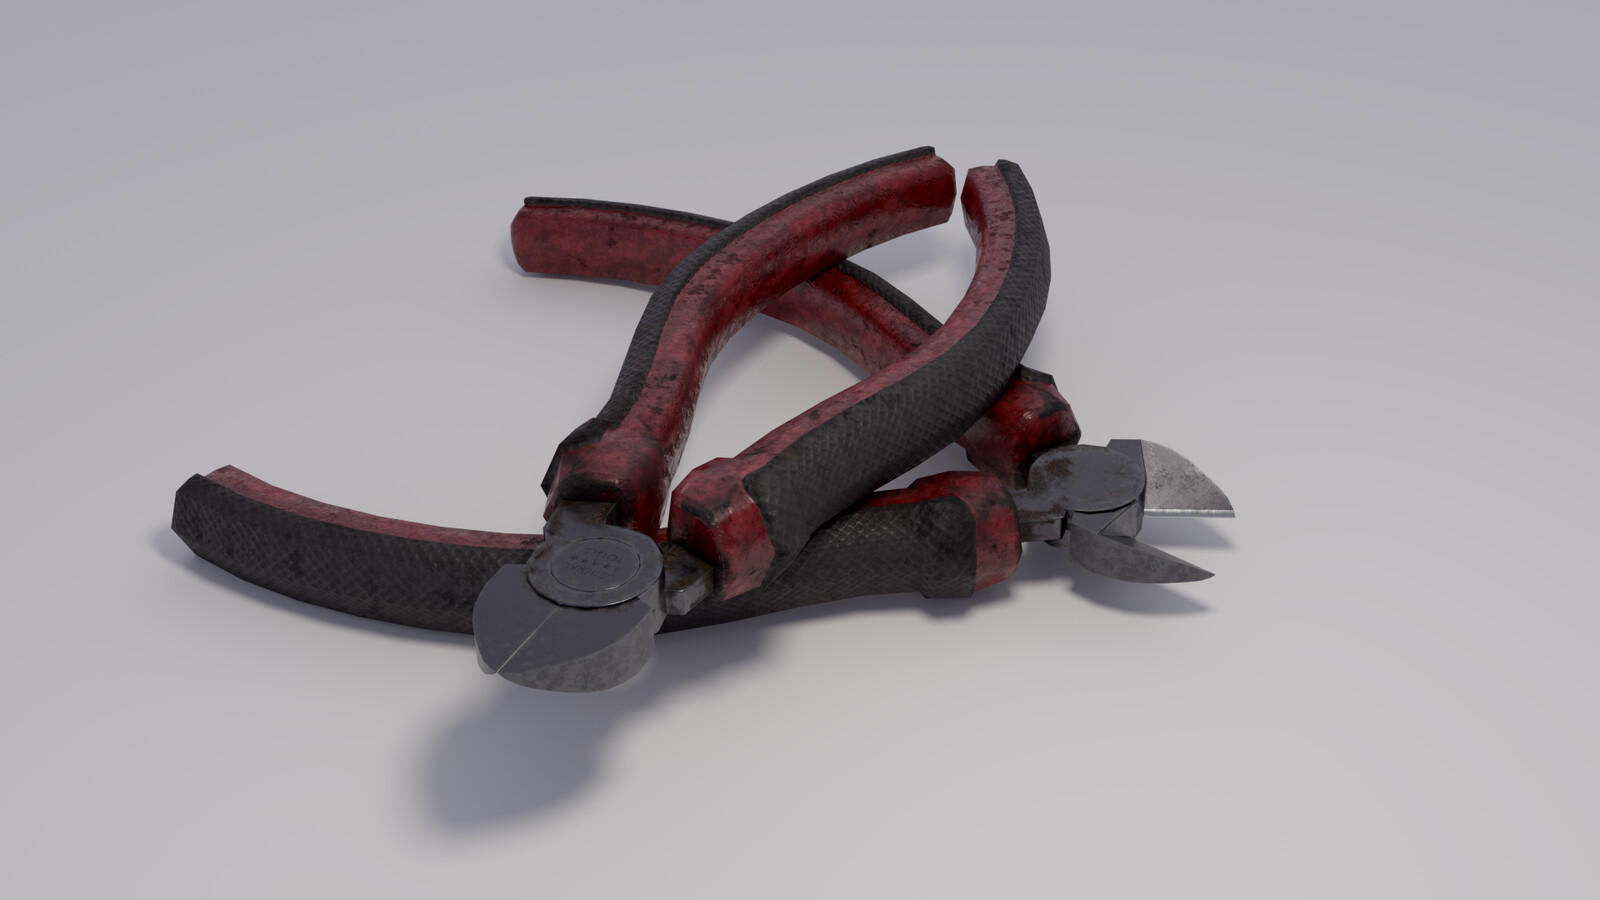 Game-ready (PC or console) wire cutters. 2048 tris, 1k PBR textures.

I wasn't sure whether to call this a low-poly model or not. It's not a super optimized mobile model, it could still work well in a context where a bit more detail is needed.